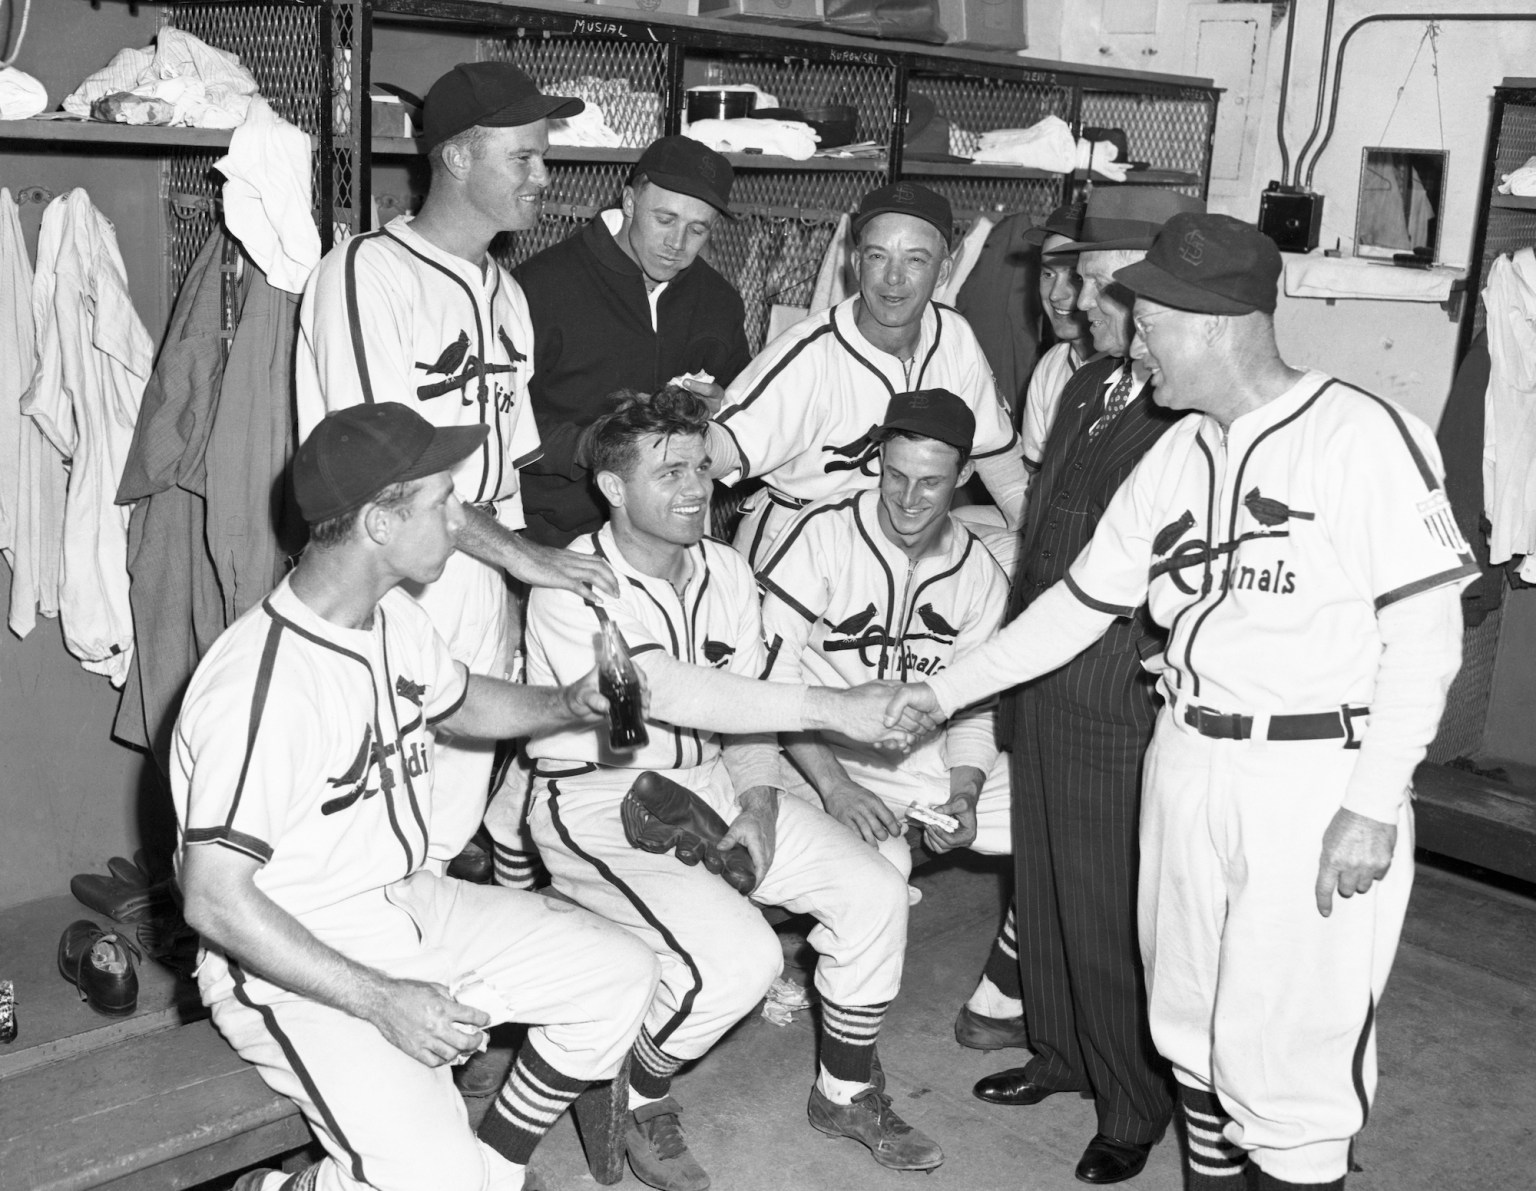 St. Louis Browns almost move to L.A. in 1941